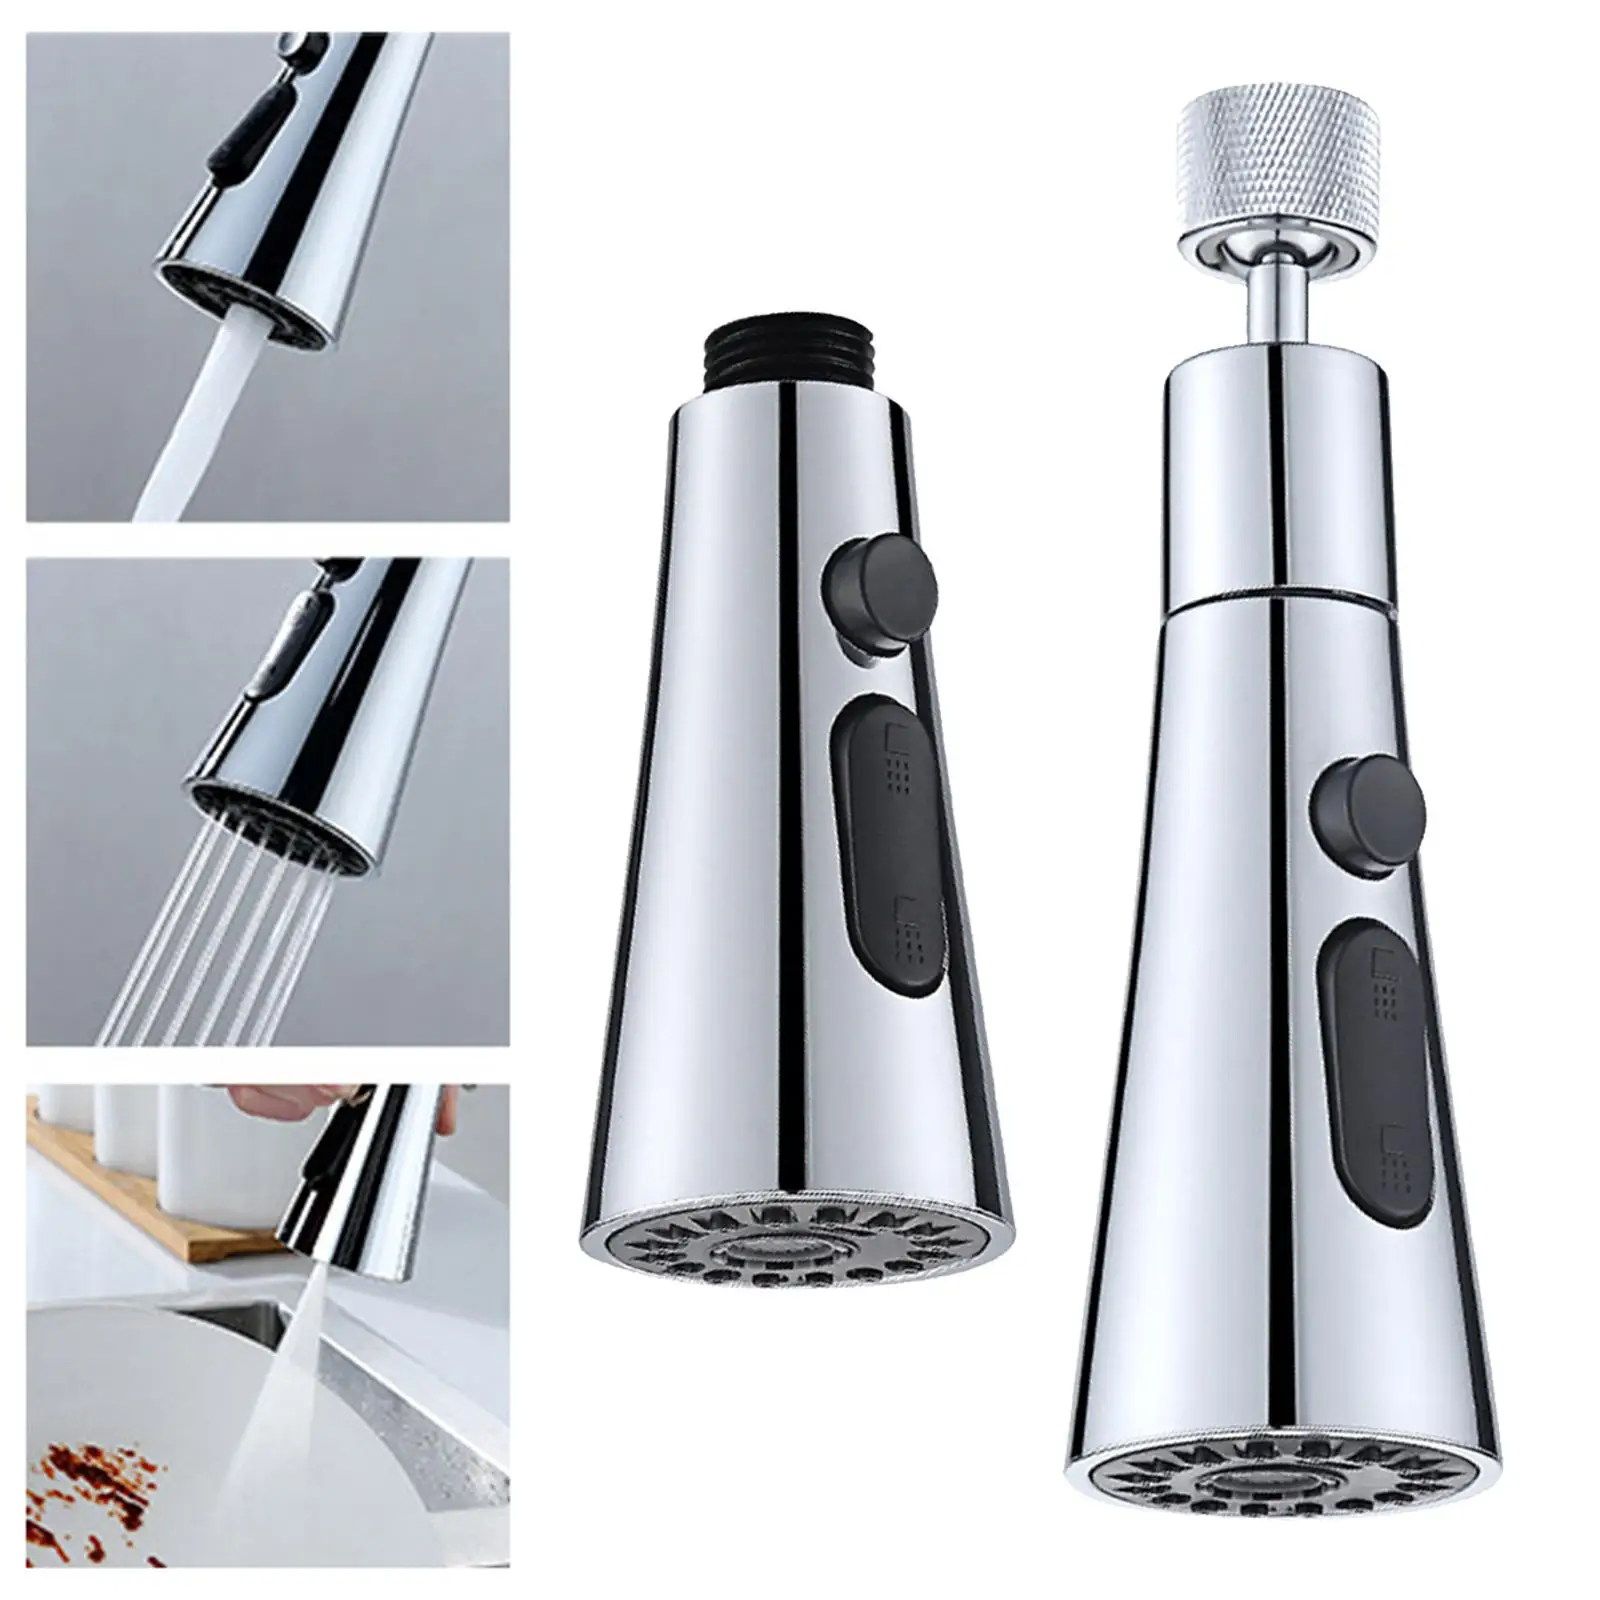 Rotatable Faucet Sprayer Kitchen Sink Faucet Faucet Aerator for Kitchen Restaurant